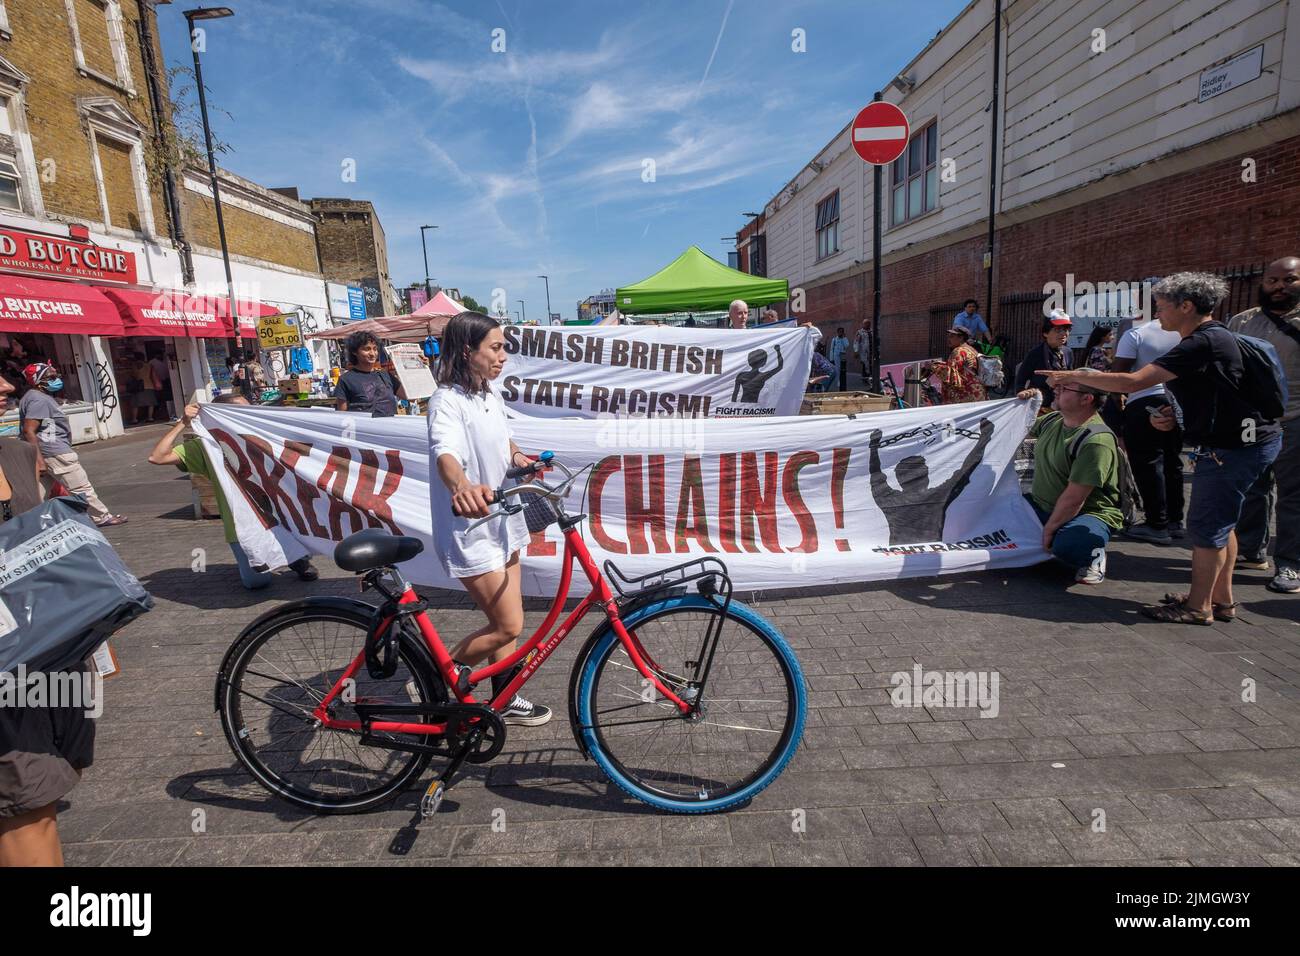 London, UK. 6 Aug 2022. A woman wheels her bike past the 'Break The Chains' banner of the Revolutionary Communist Group who spoke, handed out leaflets and collected petition signatures in front of busy Ridley Road market opposite Dalston Kingsland station. They say the UK government policies are clearly racist, exploiting migrant workers who come here and creating a hostile environment with immigration raids, treating the Windrush families disgracefully, organising charter deportation flights and planning to send refugees to Rwanda. Peter Marshall/Alamy Live News Stock Photo